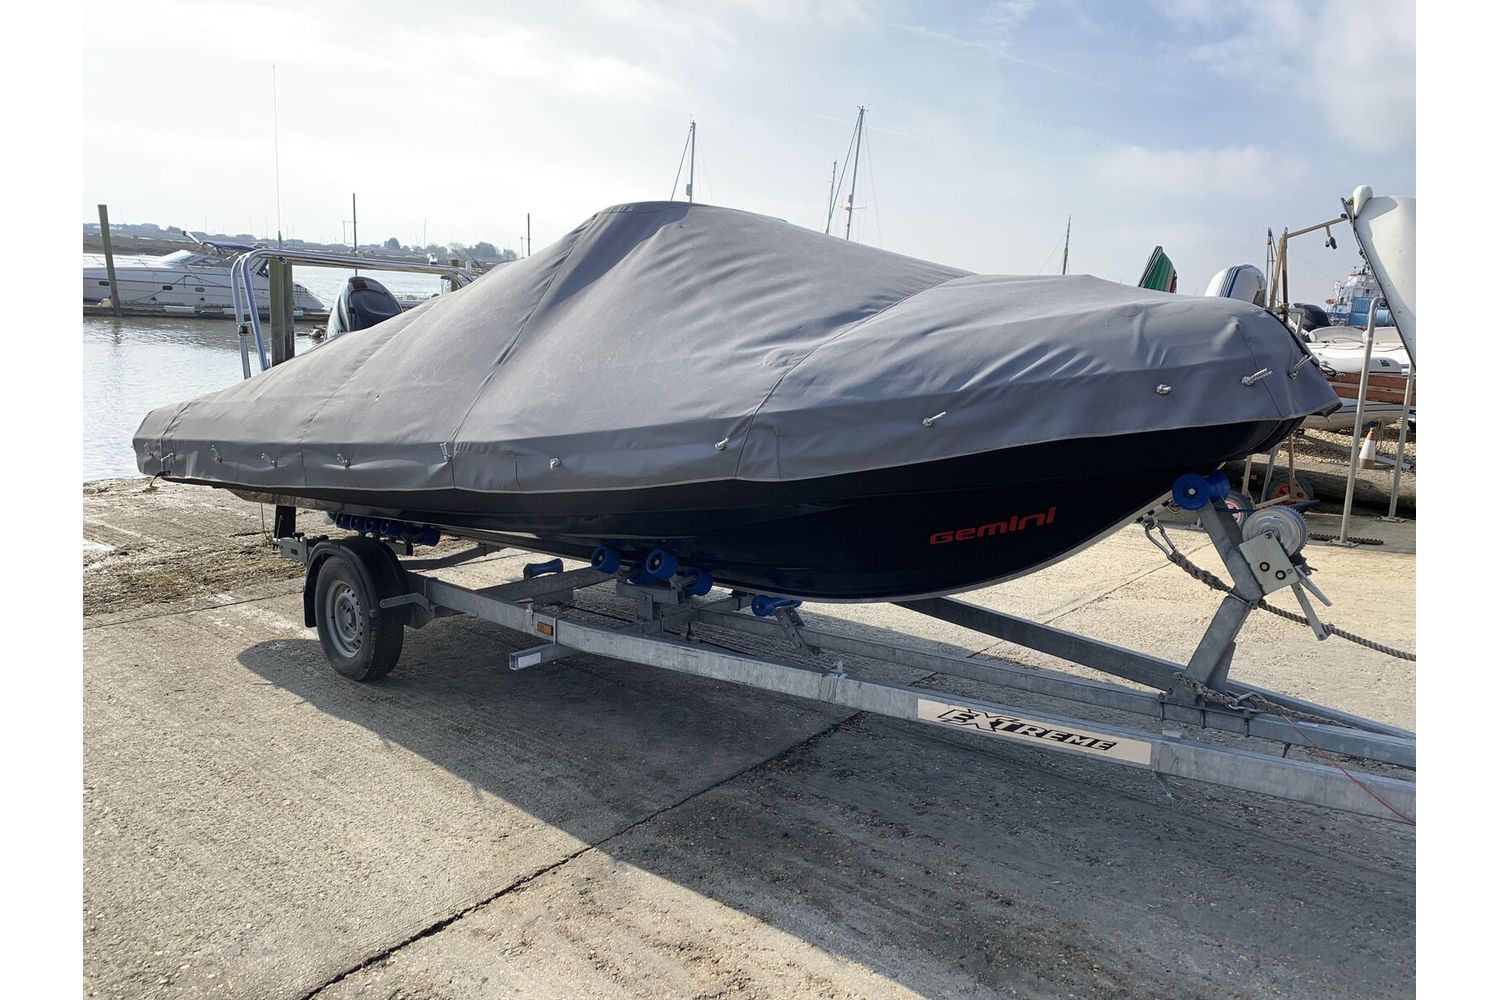 Gemini Waverider 600 RIB - with overall cover